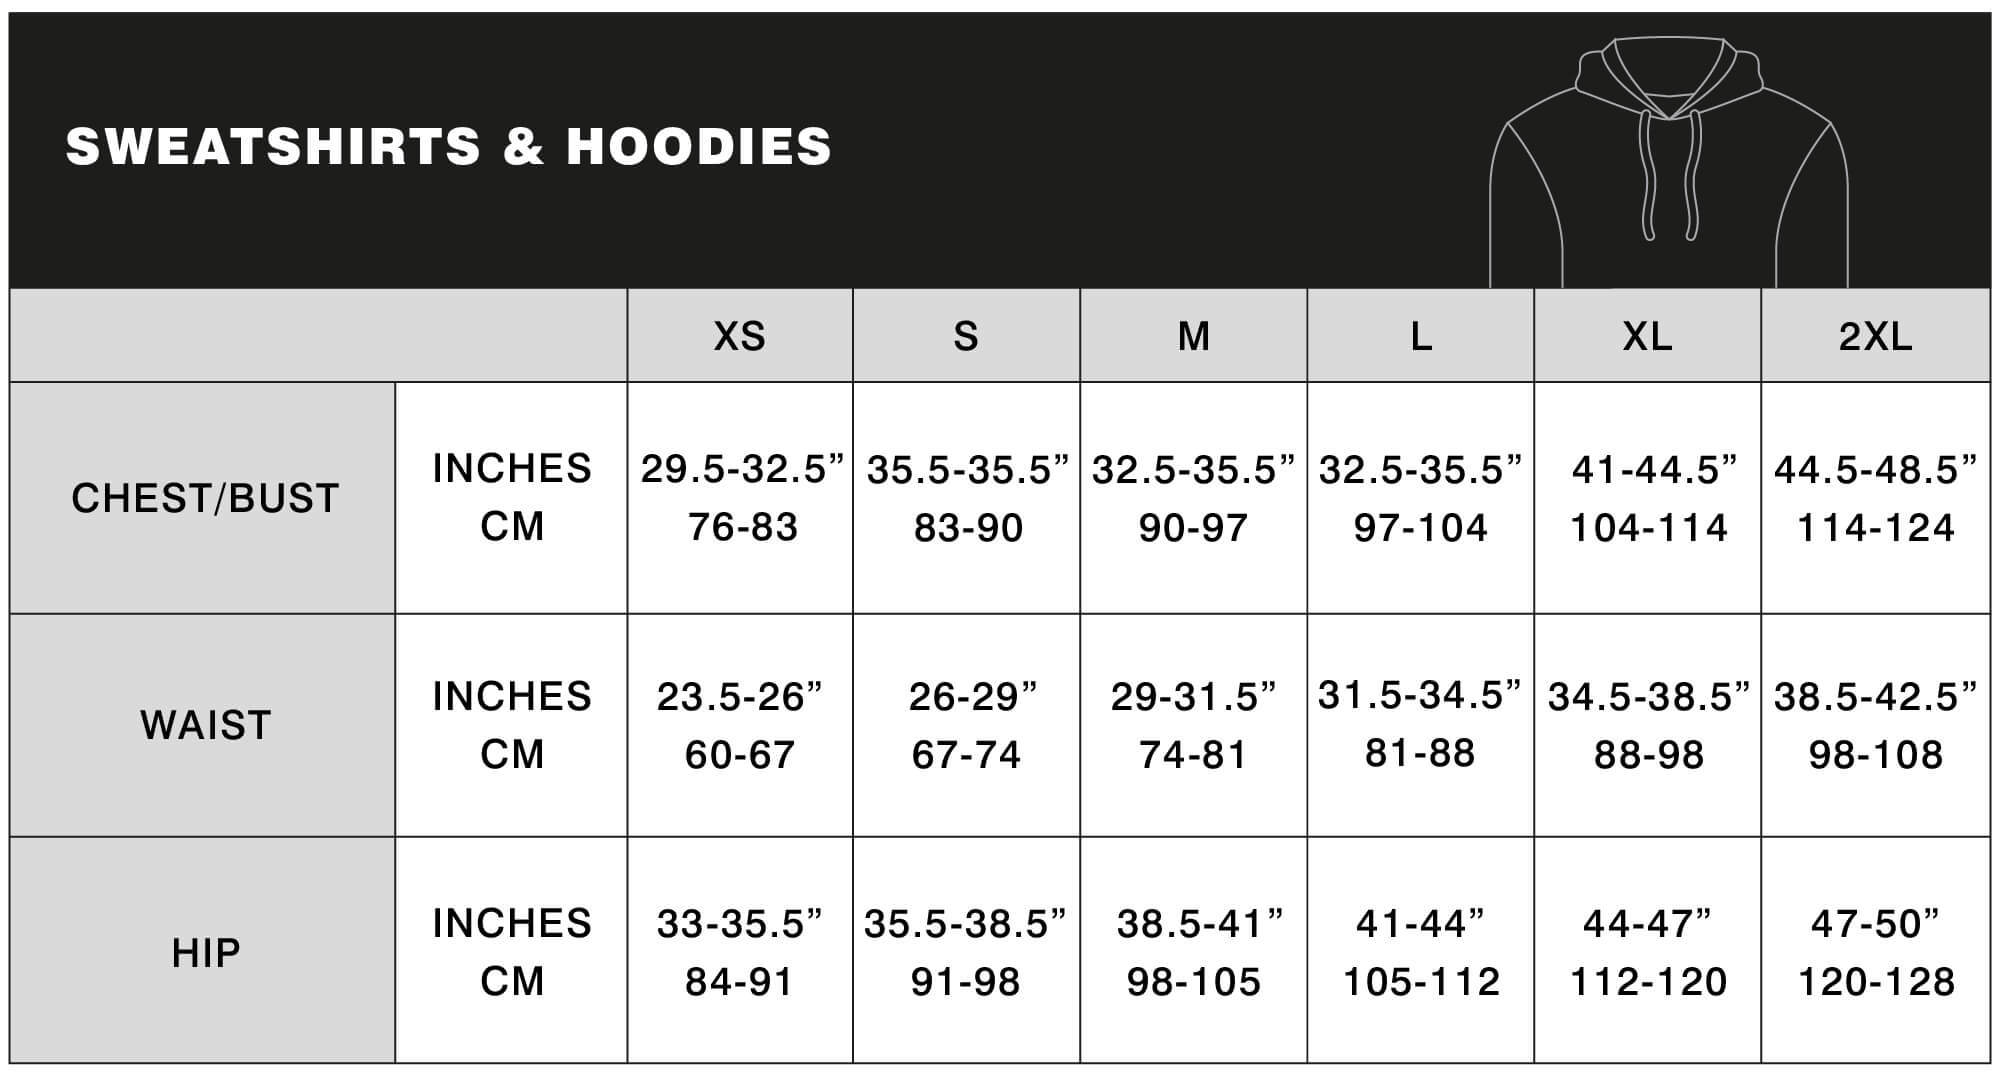 women's sweatshirts and hoodies size guide table for desktop